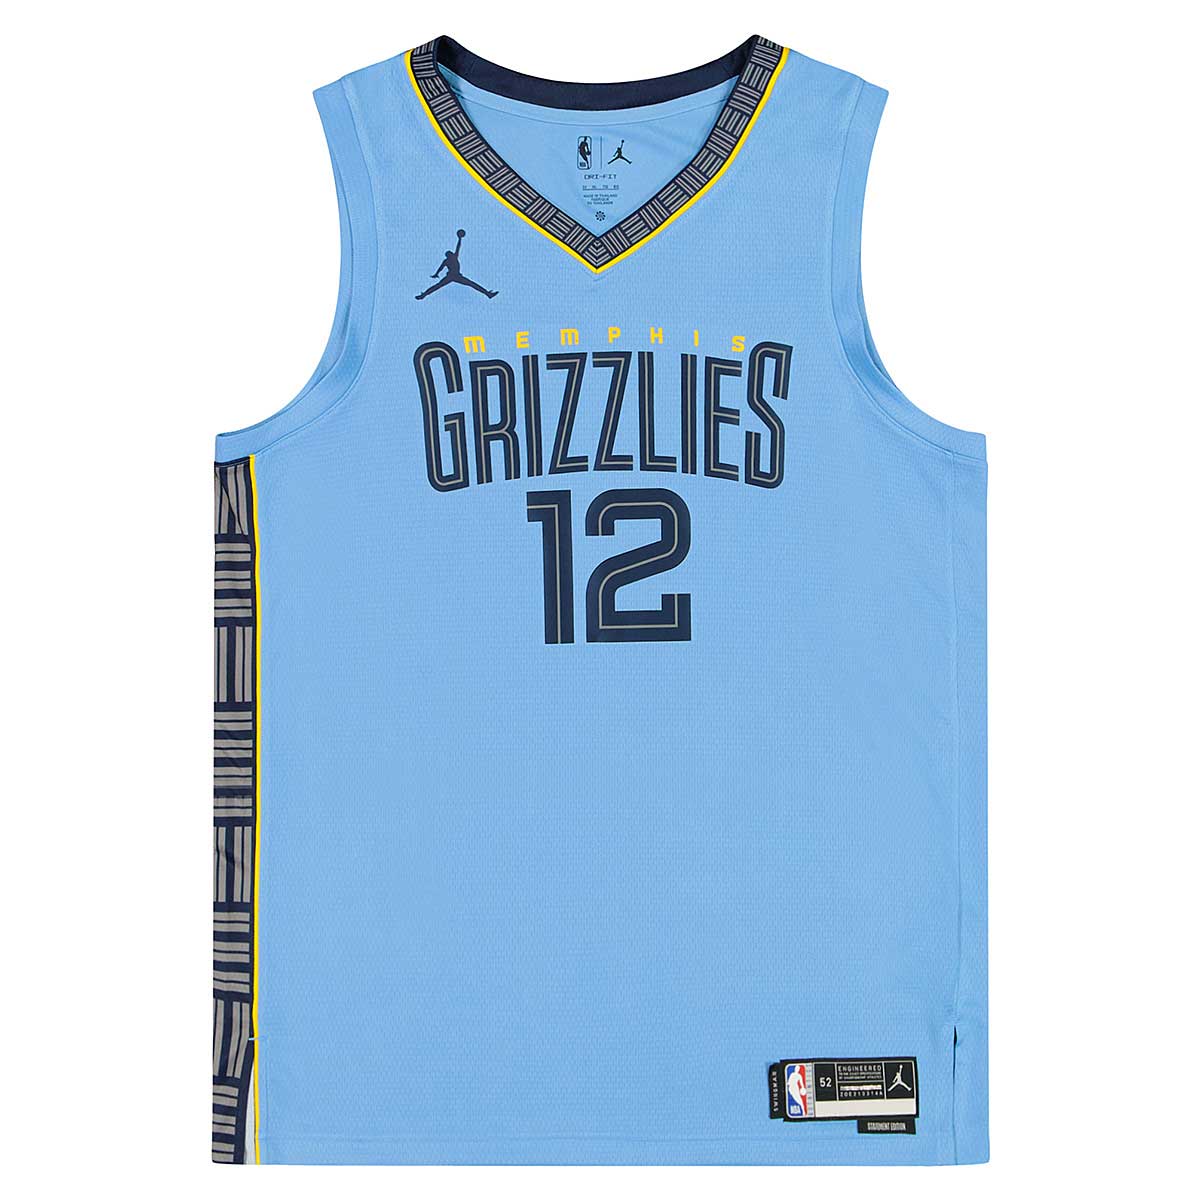 Memphis Grizzlies Dry-fit Basketball Shorts